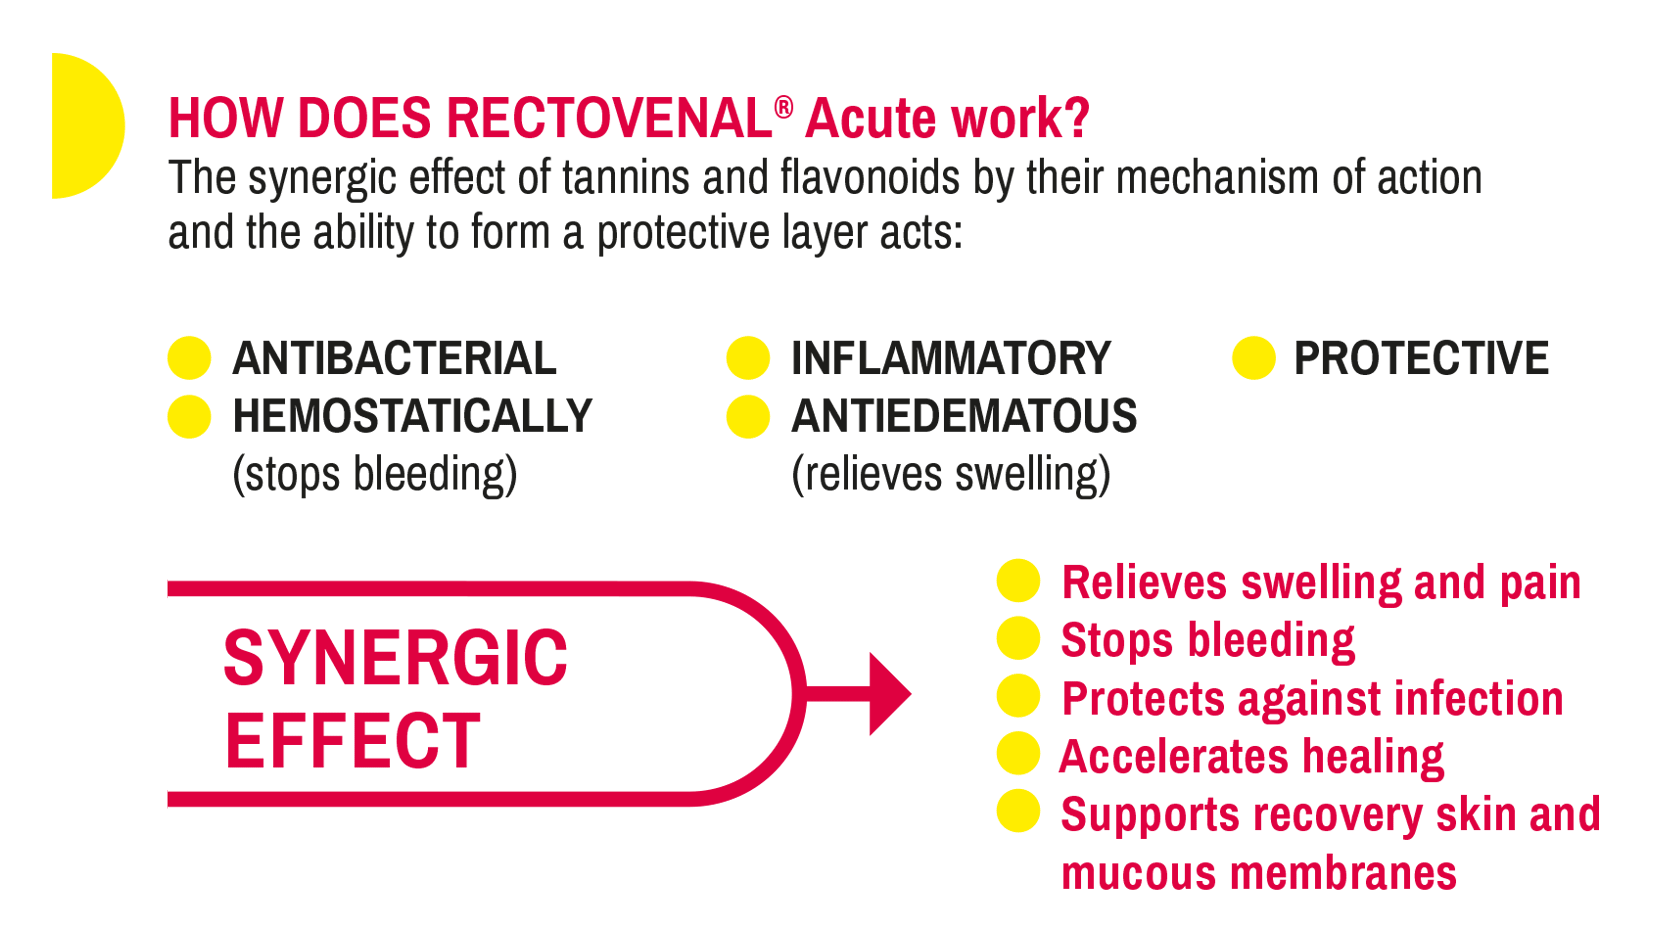 Rectovenal - Mechanism of action